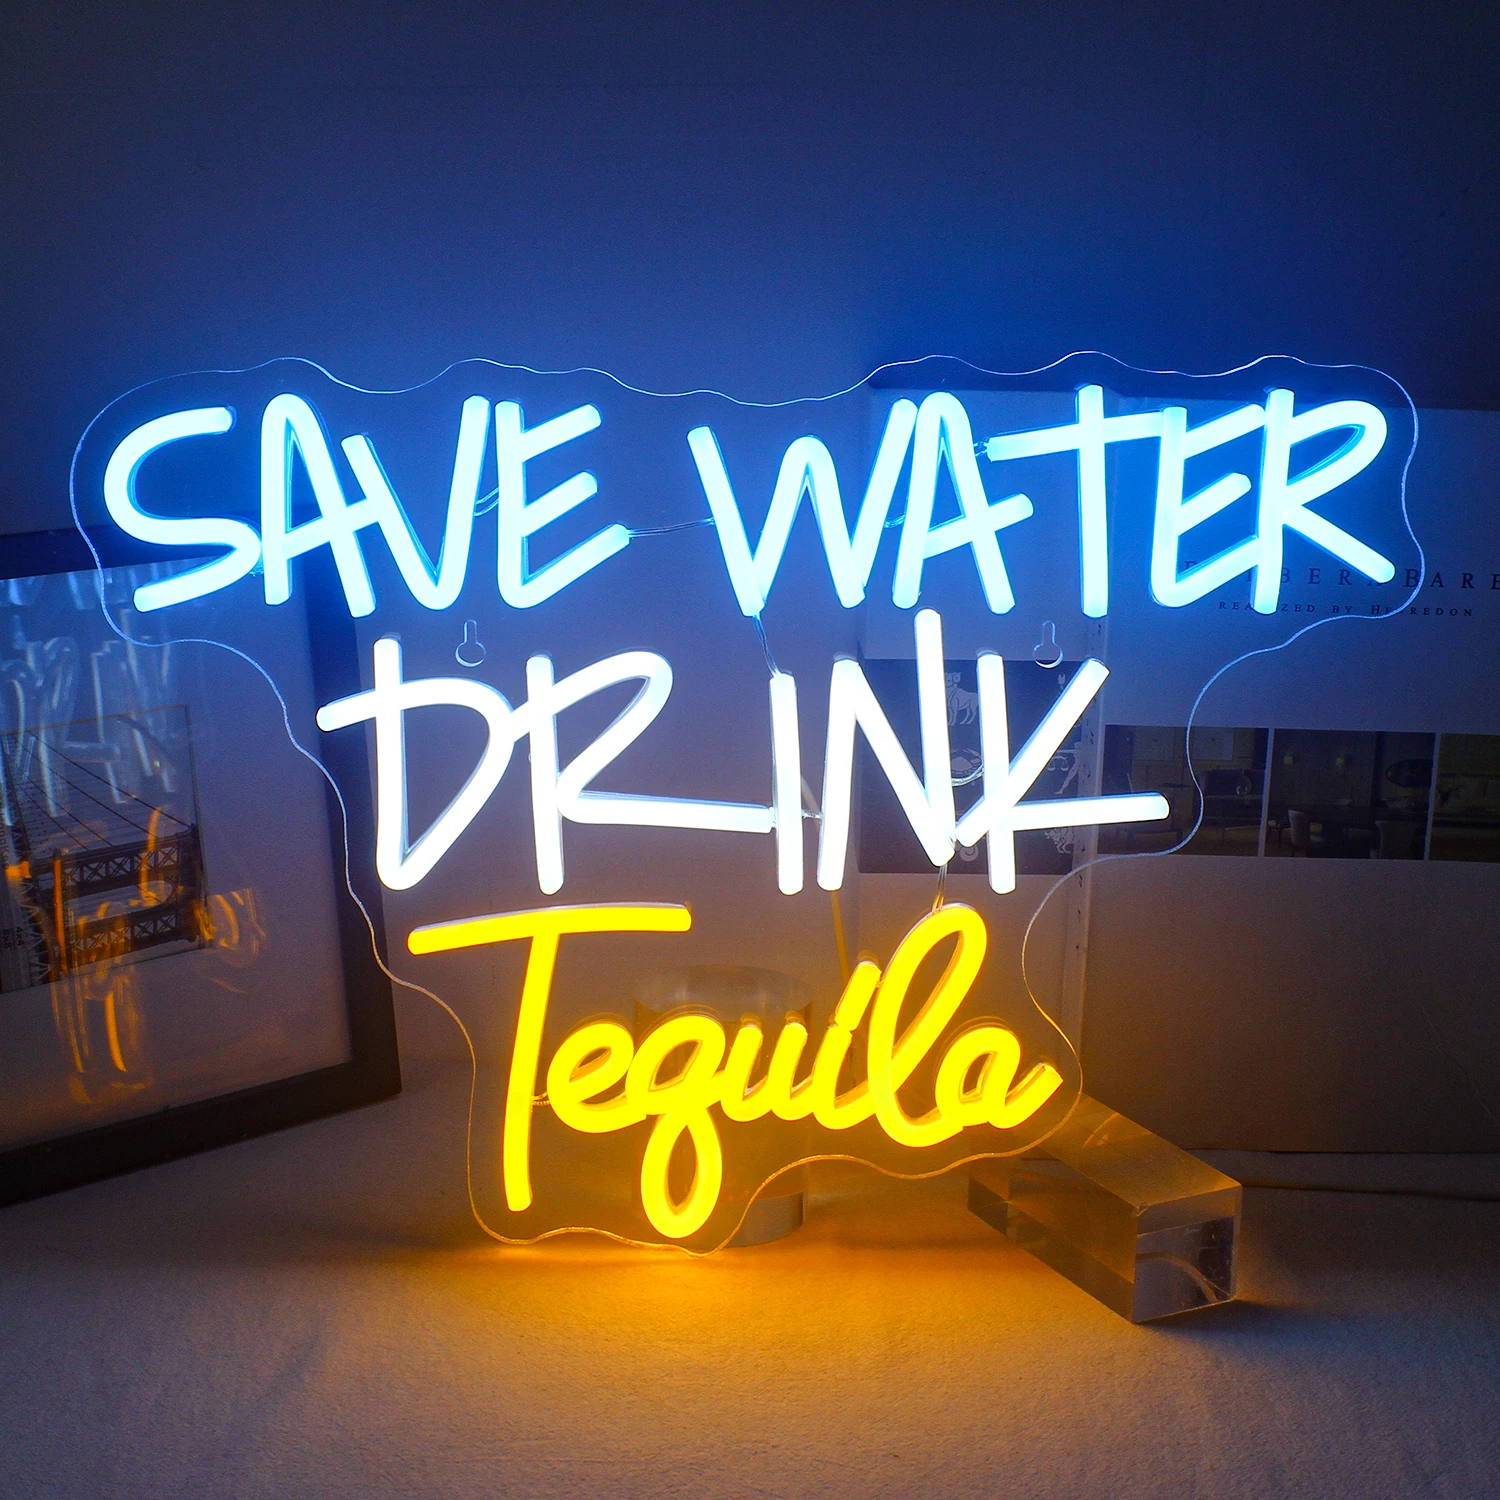 Save Water Drink Tequila Neon Sign Led Neon Lights for Wall Decor USB Light Up Signs Beer Bar Restaurant Cafe Club Party Decor